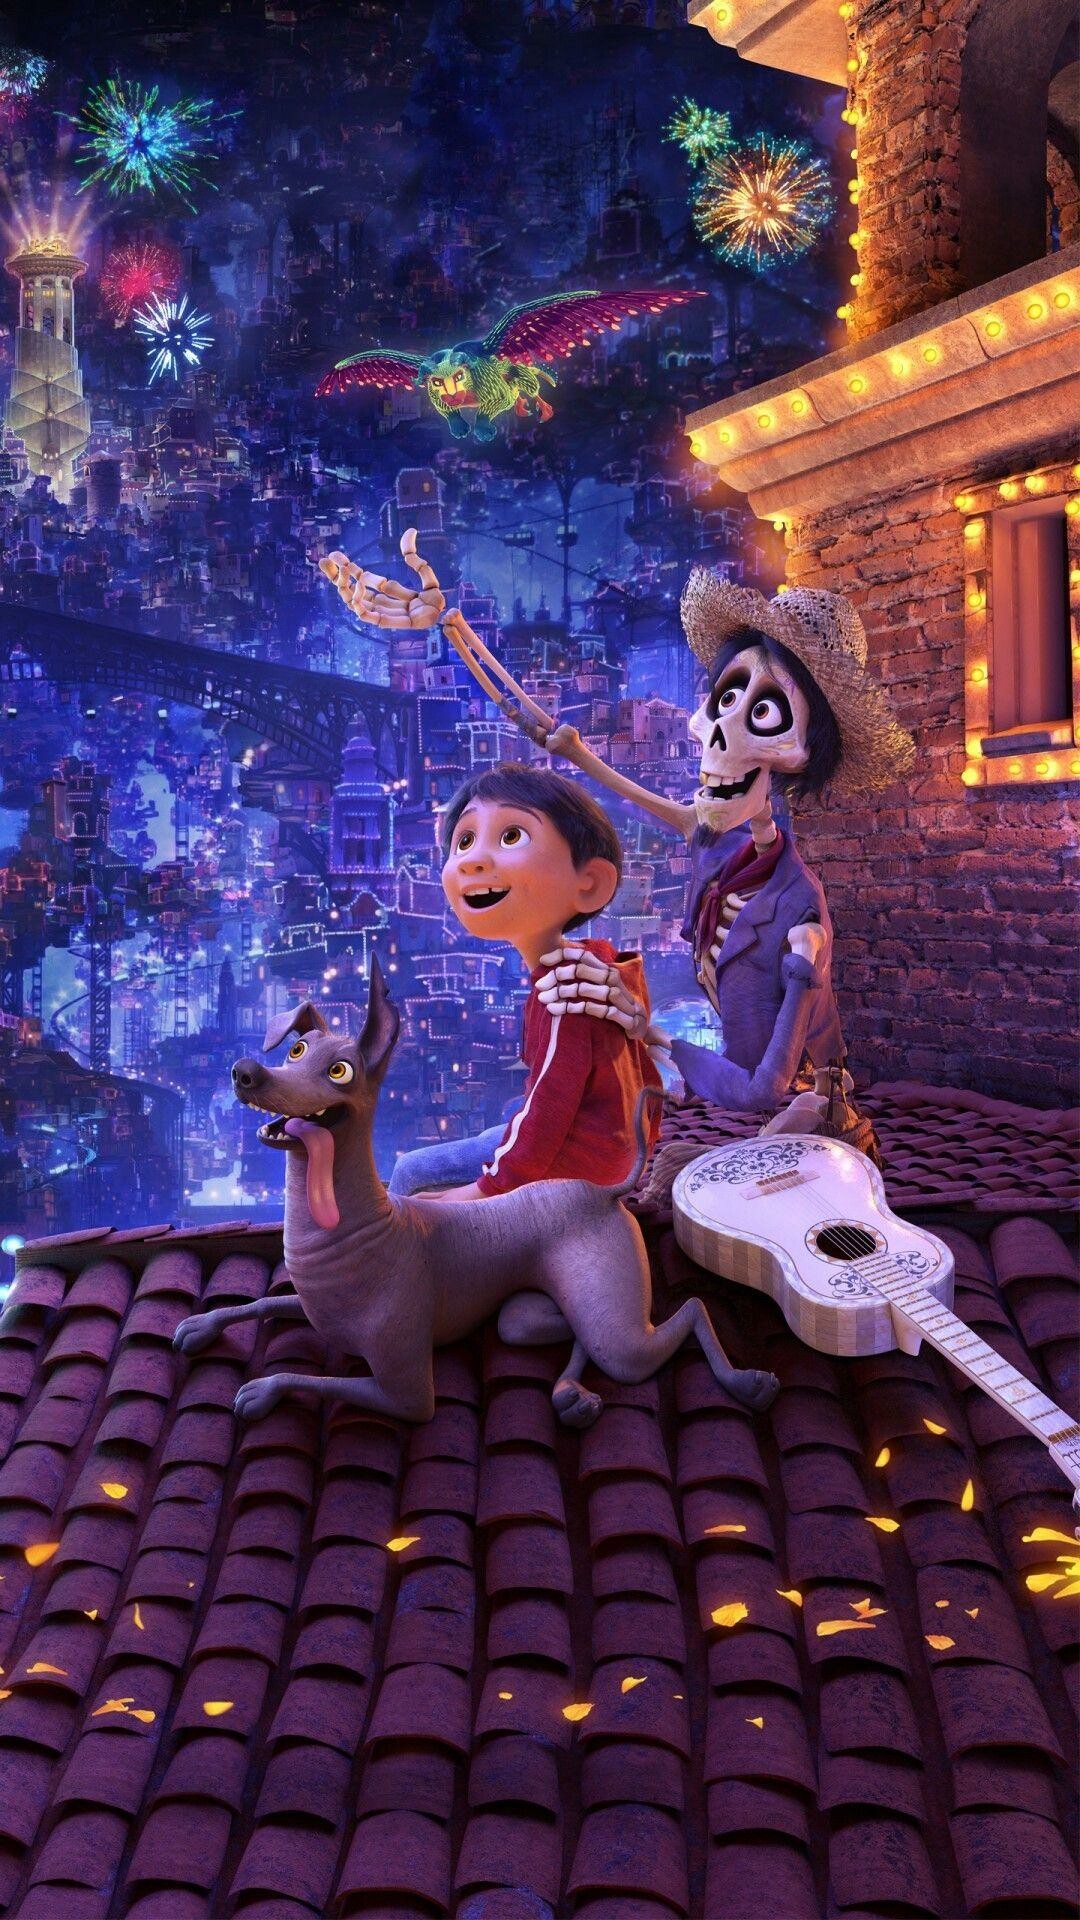 Coco (Cartoon): In Disney-Pixar's vibrant tale of family, fun, and adventure, an aspiring young musician named Miguel embarks on an extraordinary journey to the magical land of his ancestors. 1080x1920 Full HD Wallpaper.